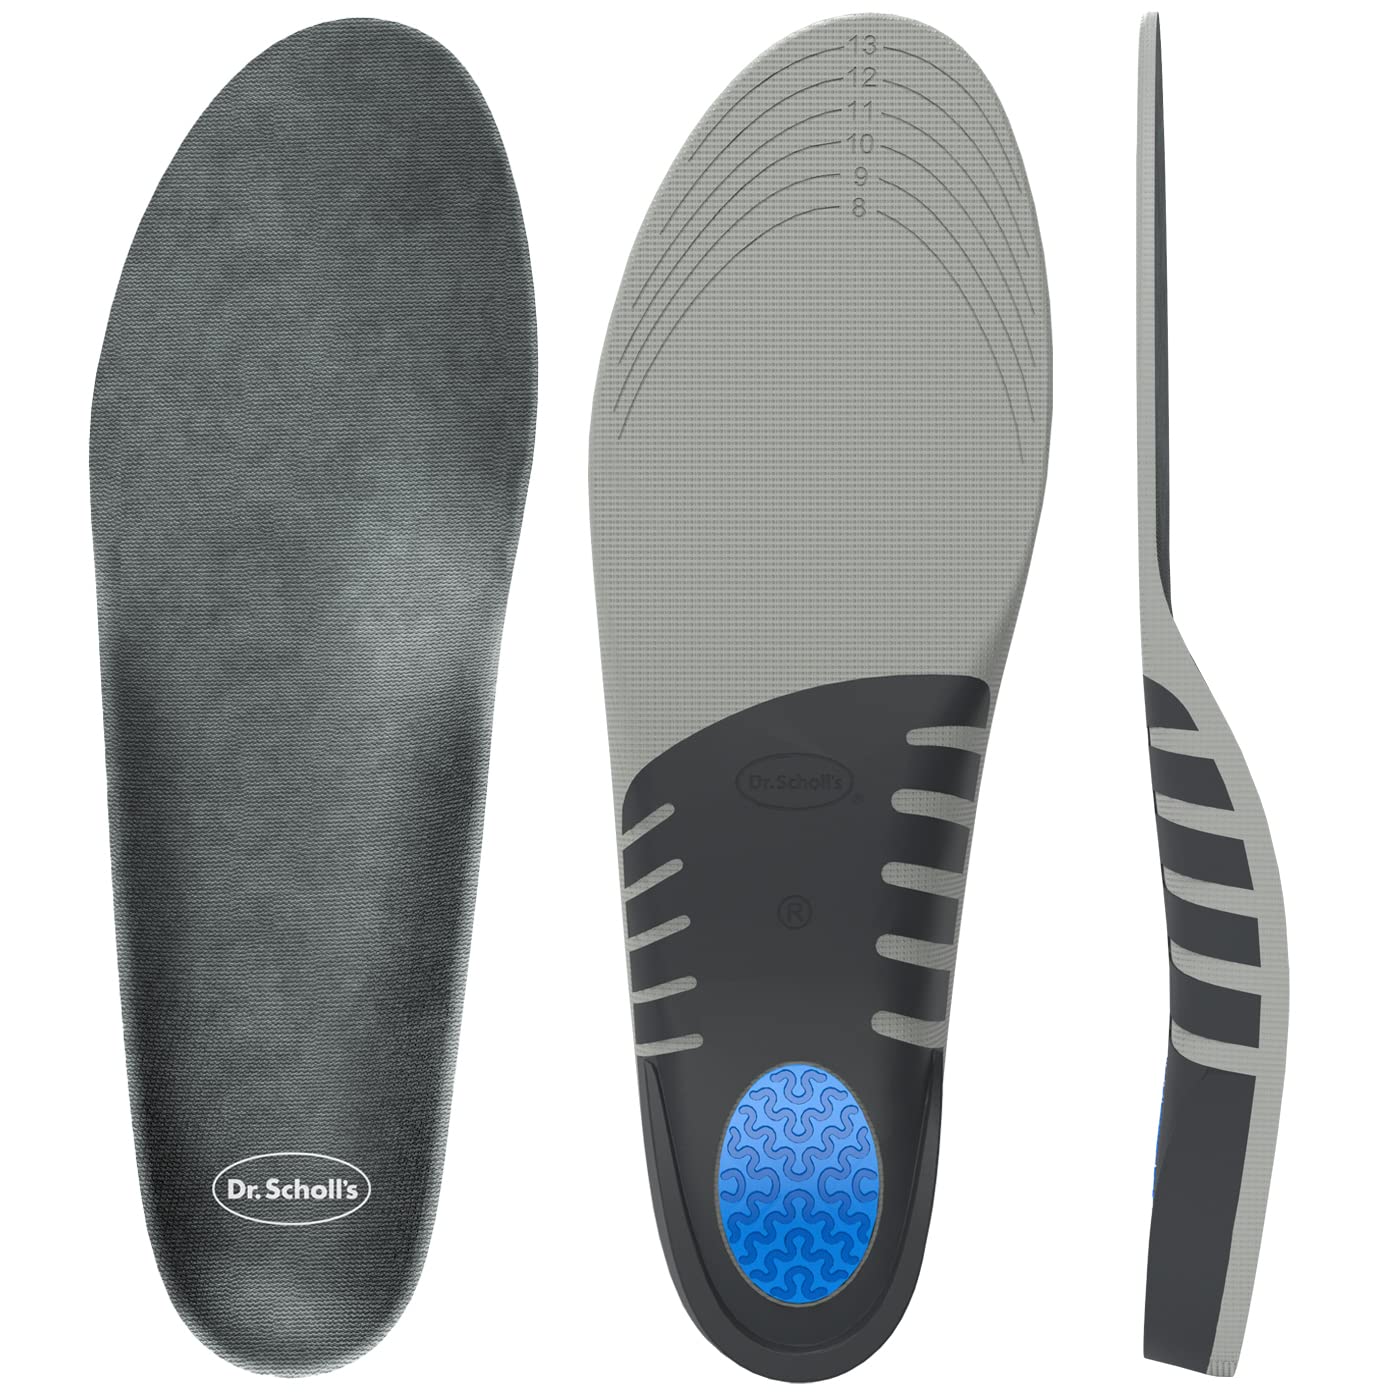 Dr. Scholl's Stabilizing Support Insole Improves Posture, Alignment & Balance. Added Arch Support for Flat Feet & Overpronation (Men's 8-14), Trim to Fit Inserts